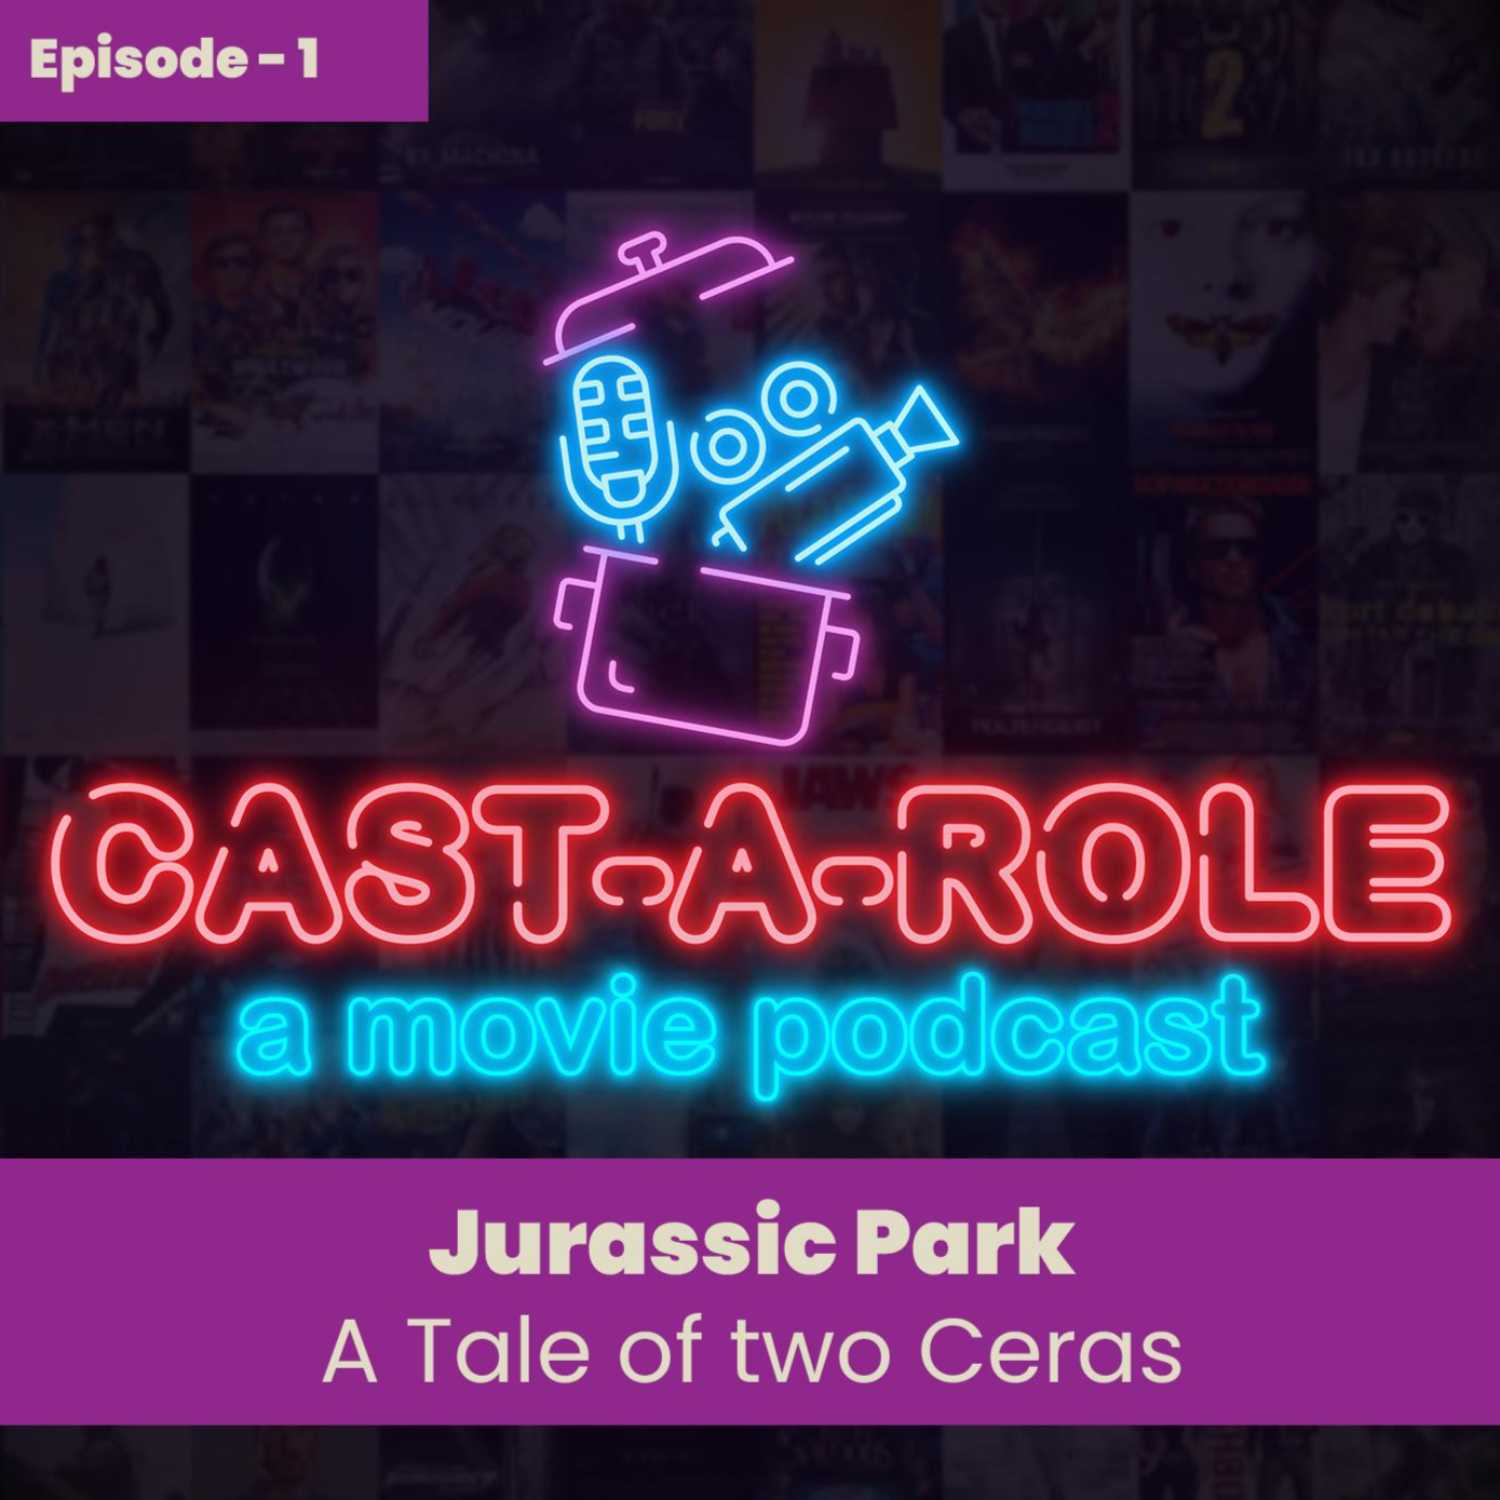 Episode 1 - Jurassic Park, A Tale of Two Ceras